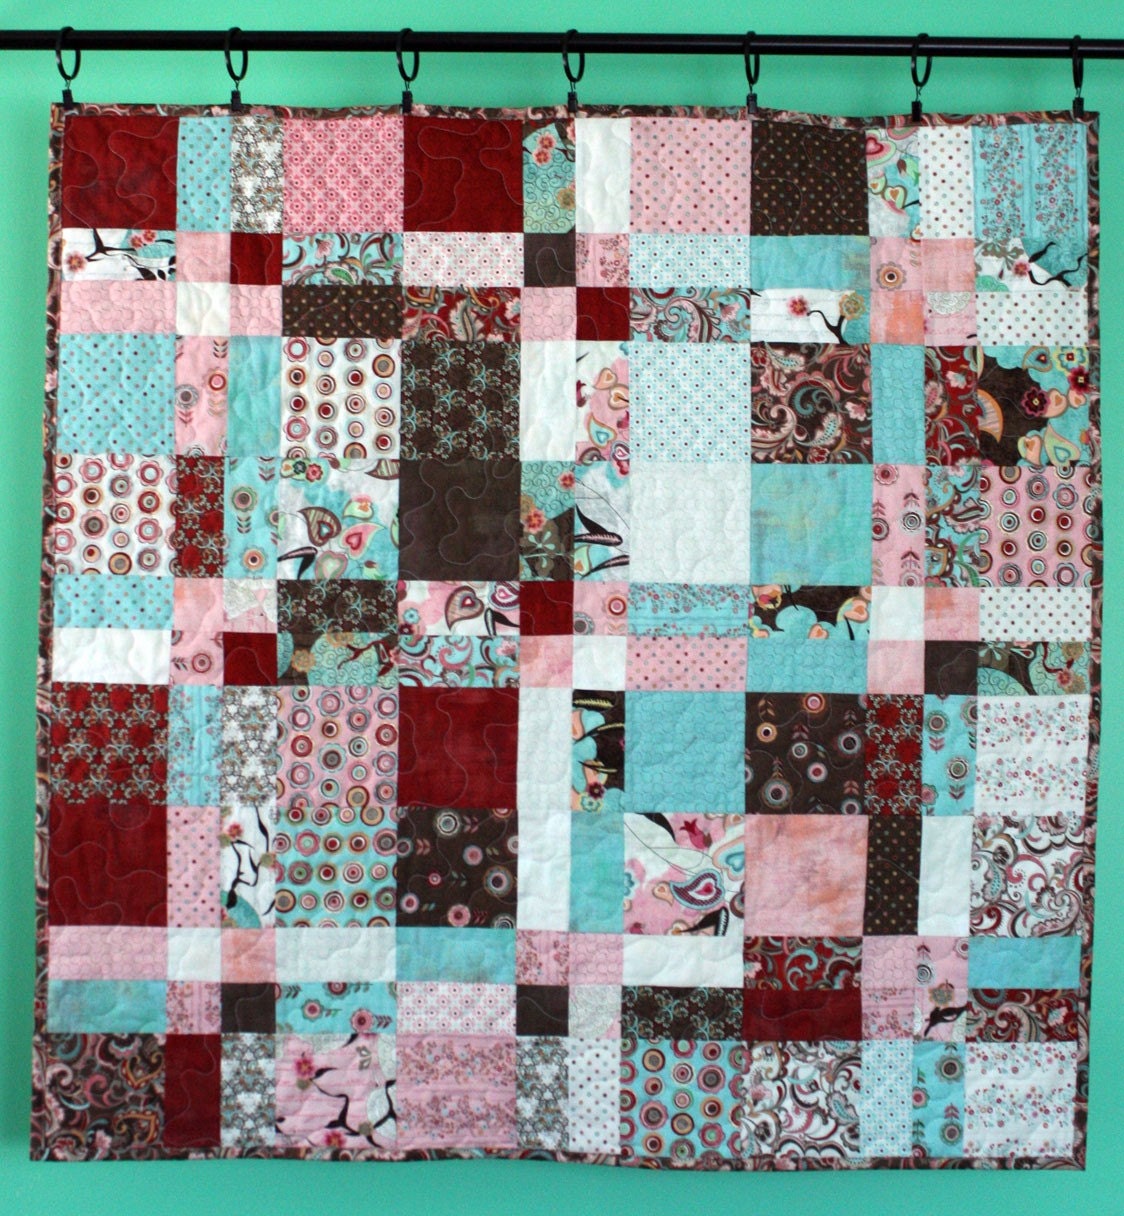 blush baby quilt - - double dutch floral baby crib or wall hanging quilt